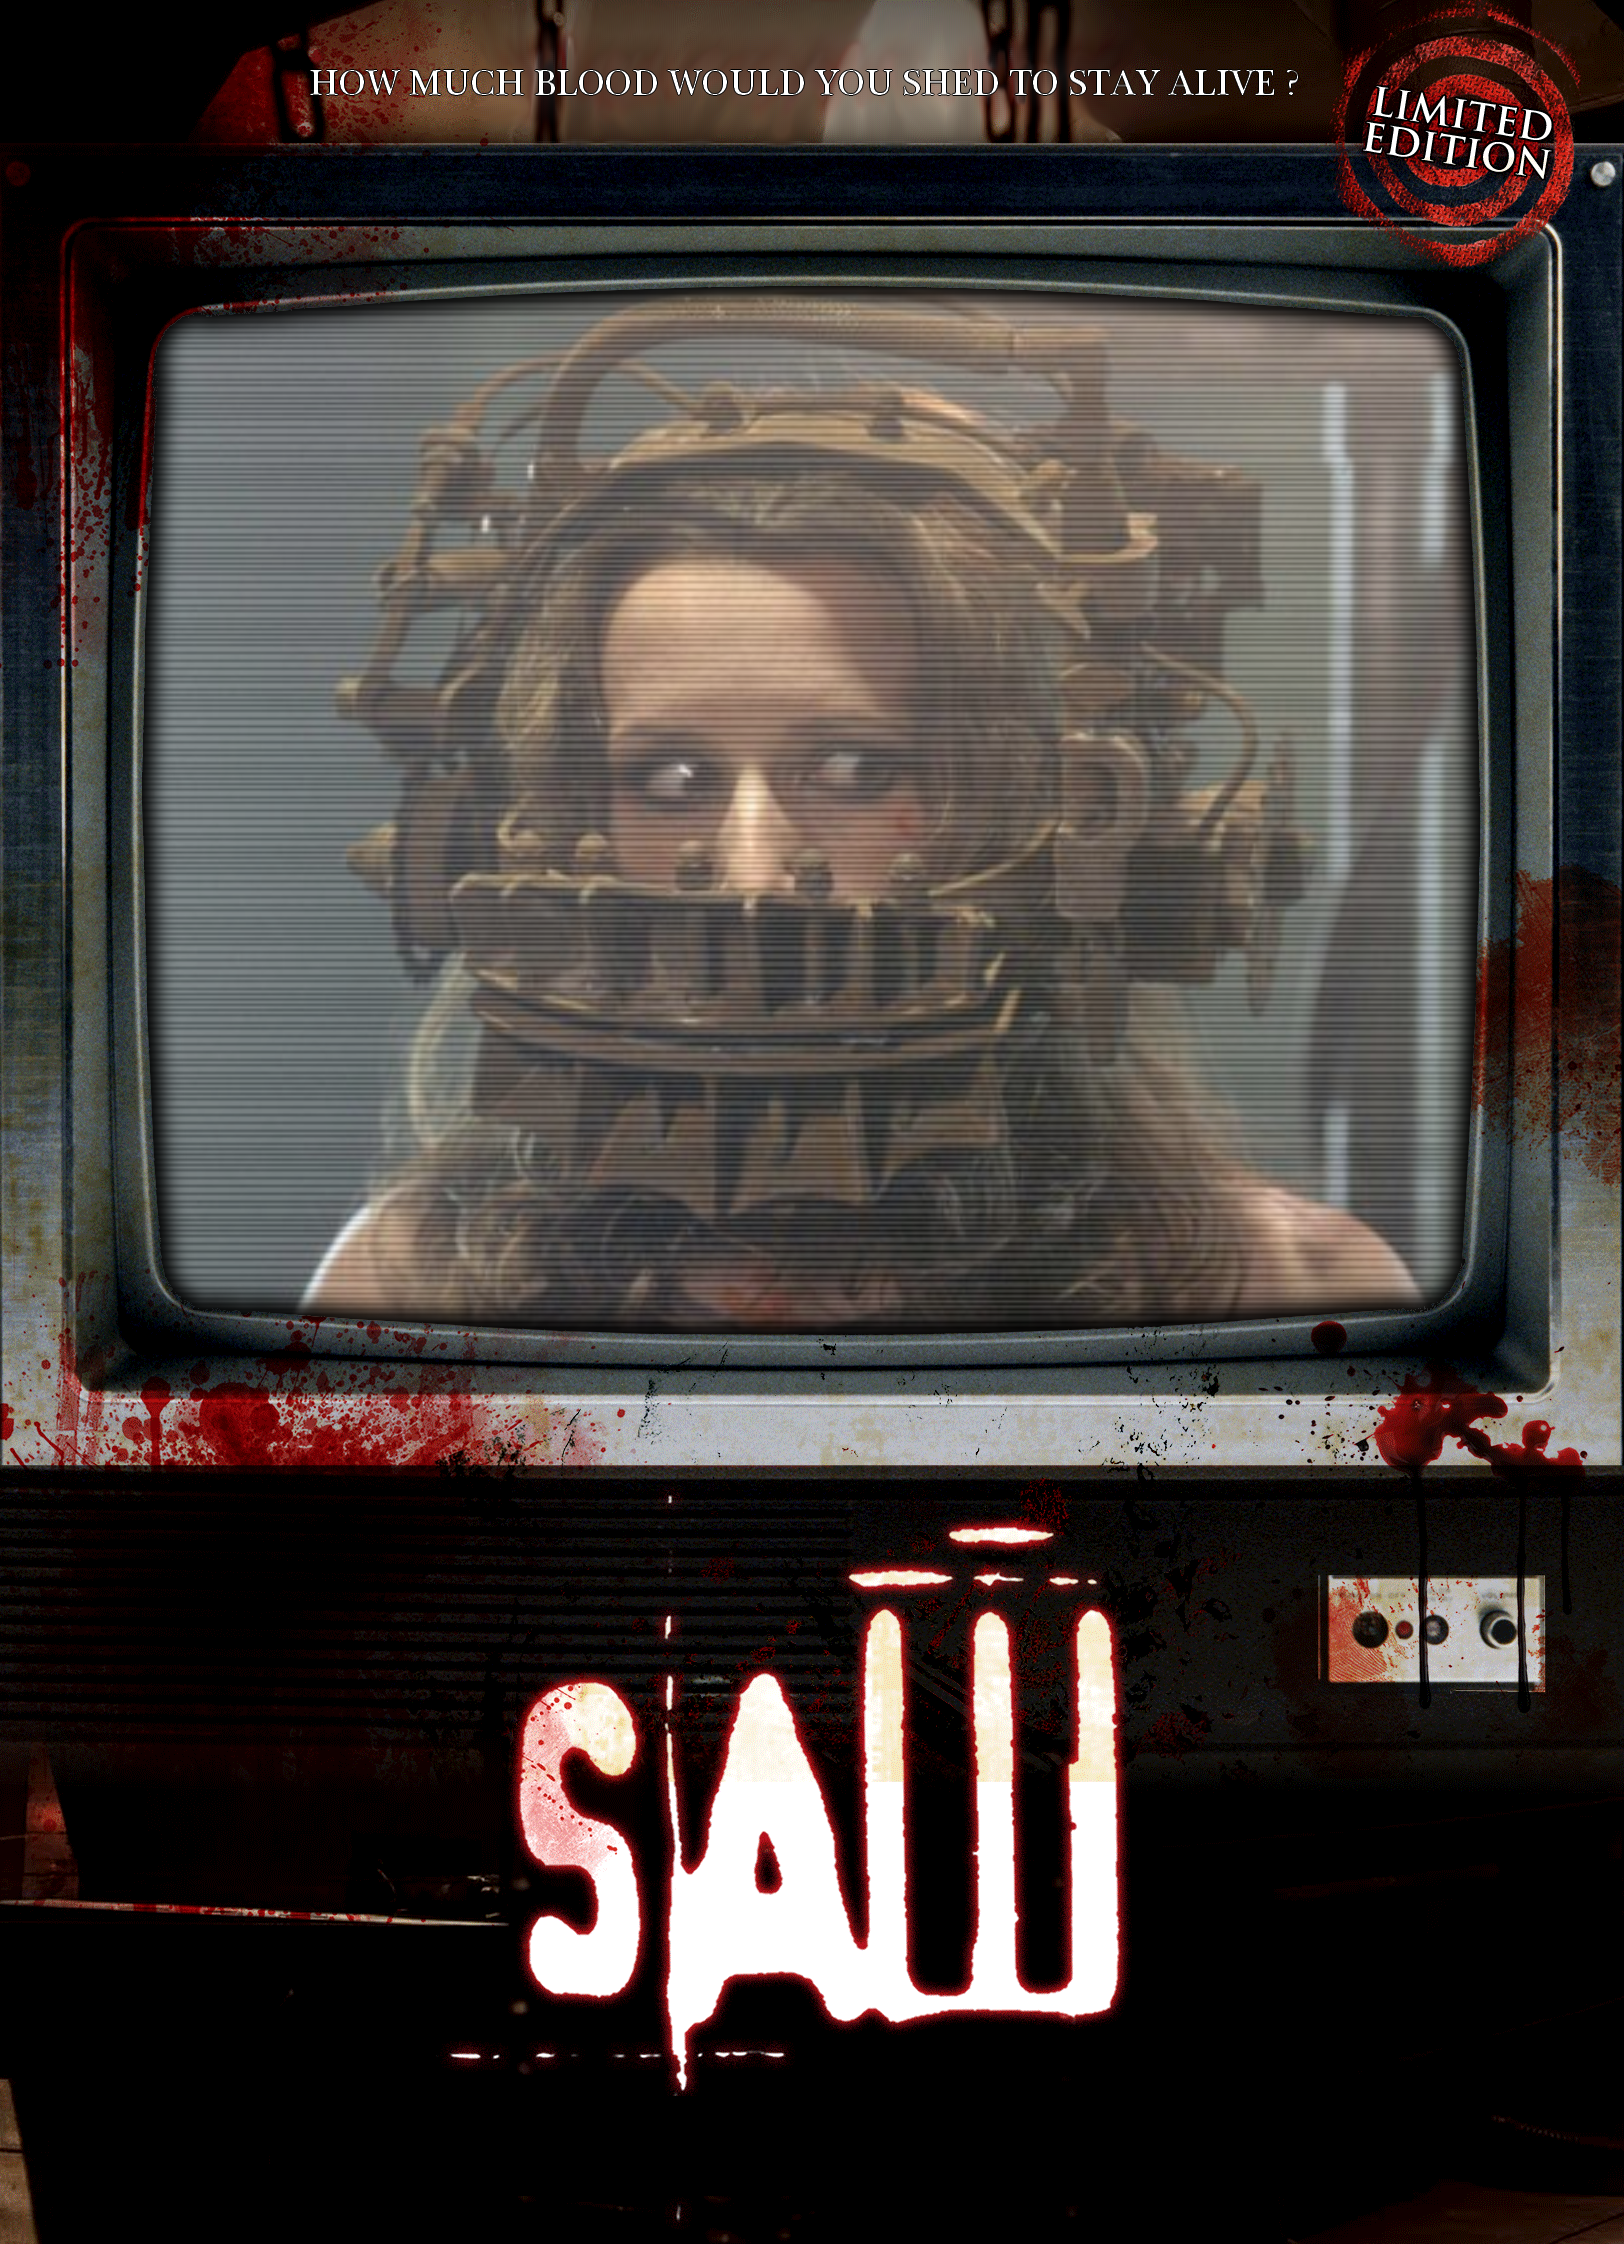 Saw Poster box cover